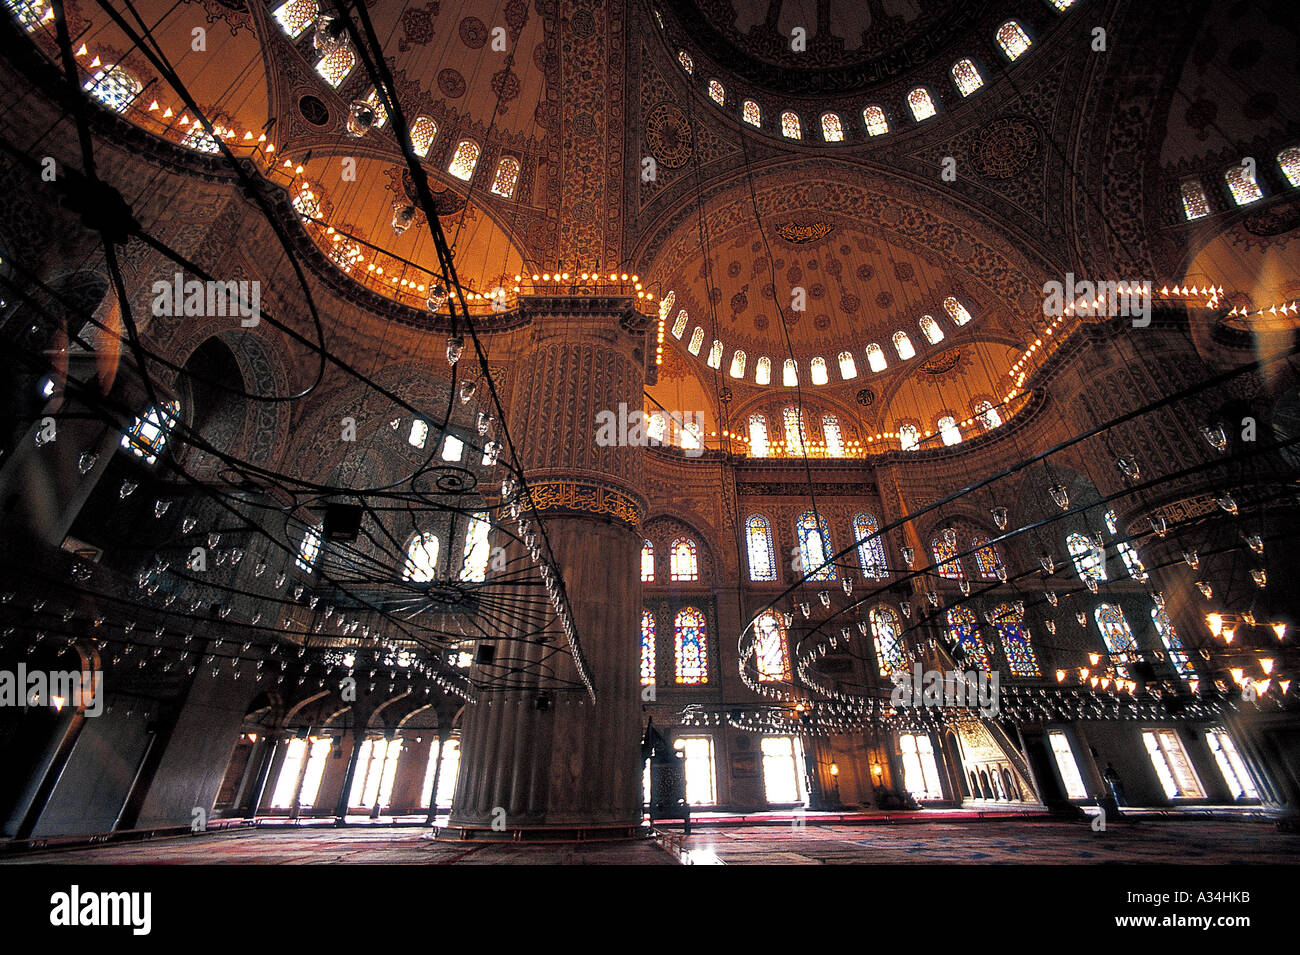 A view of the inside of an Islamic temple with huge lighting features Stock Photo